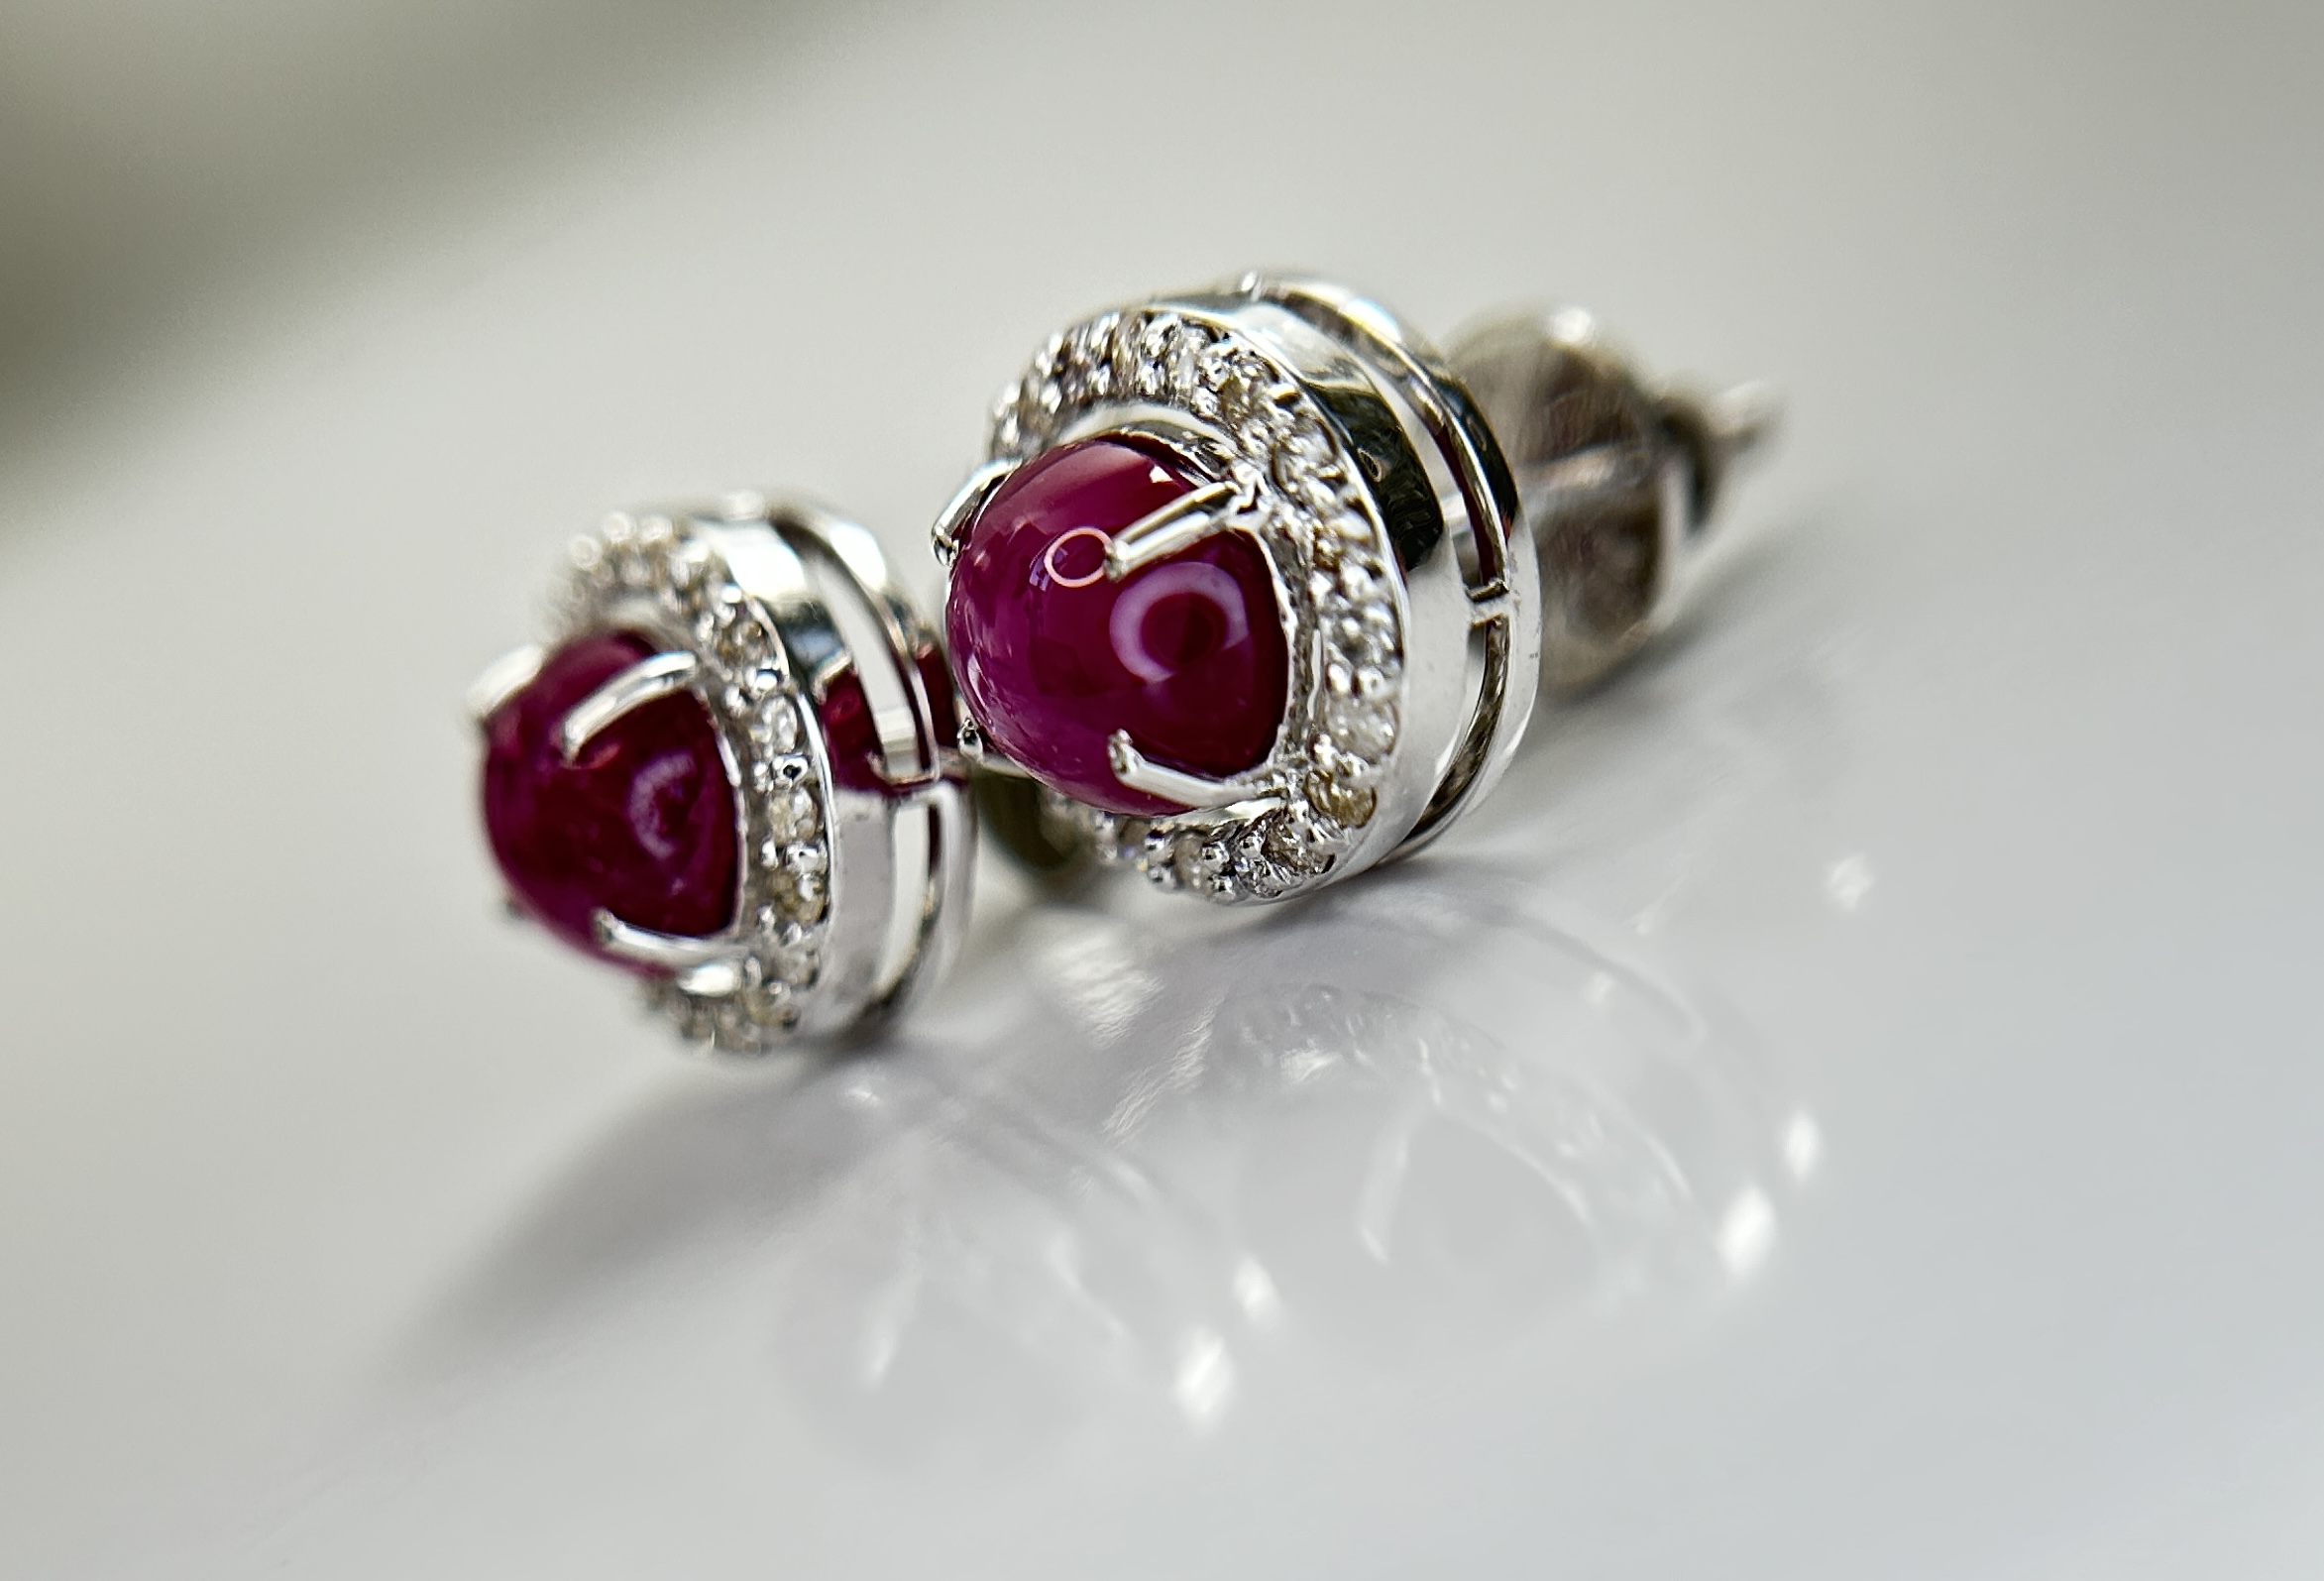 Beautiful Natural Star Ruby Earrings 3.21CT With Natural Diamonds & 18k Gold - Image 6 of 12